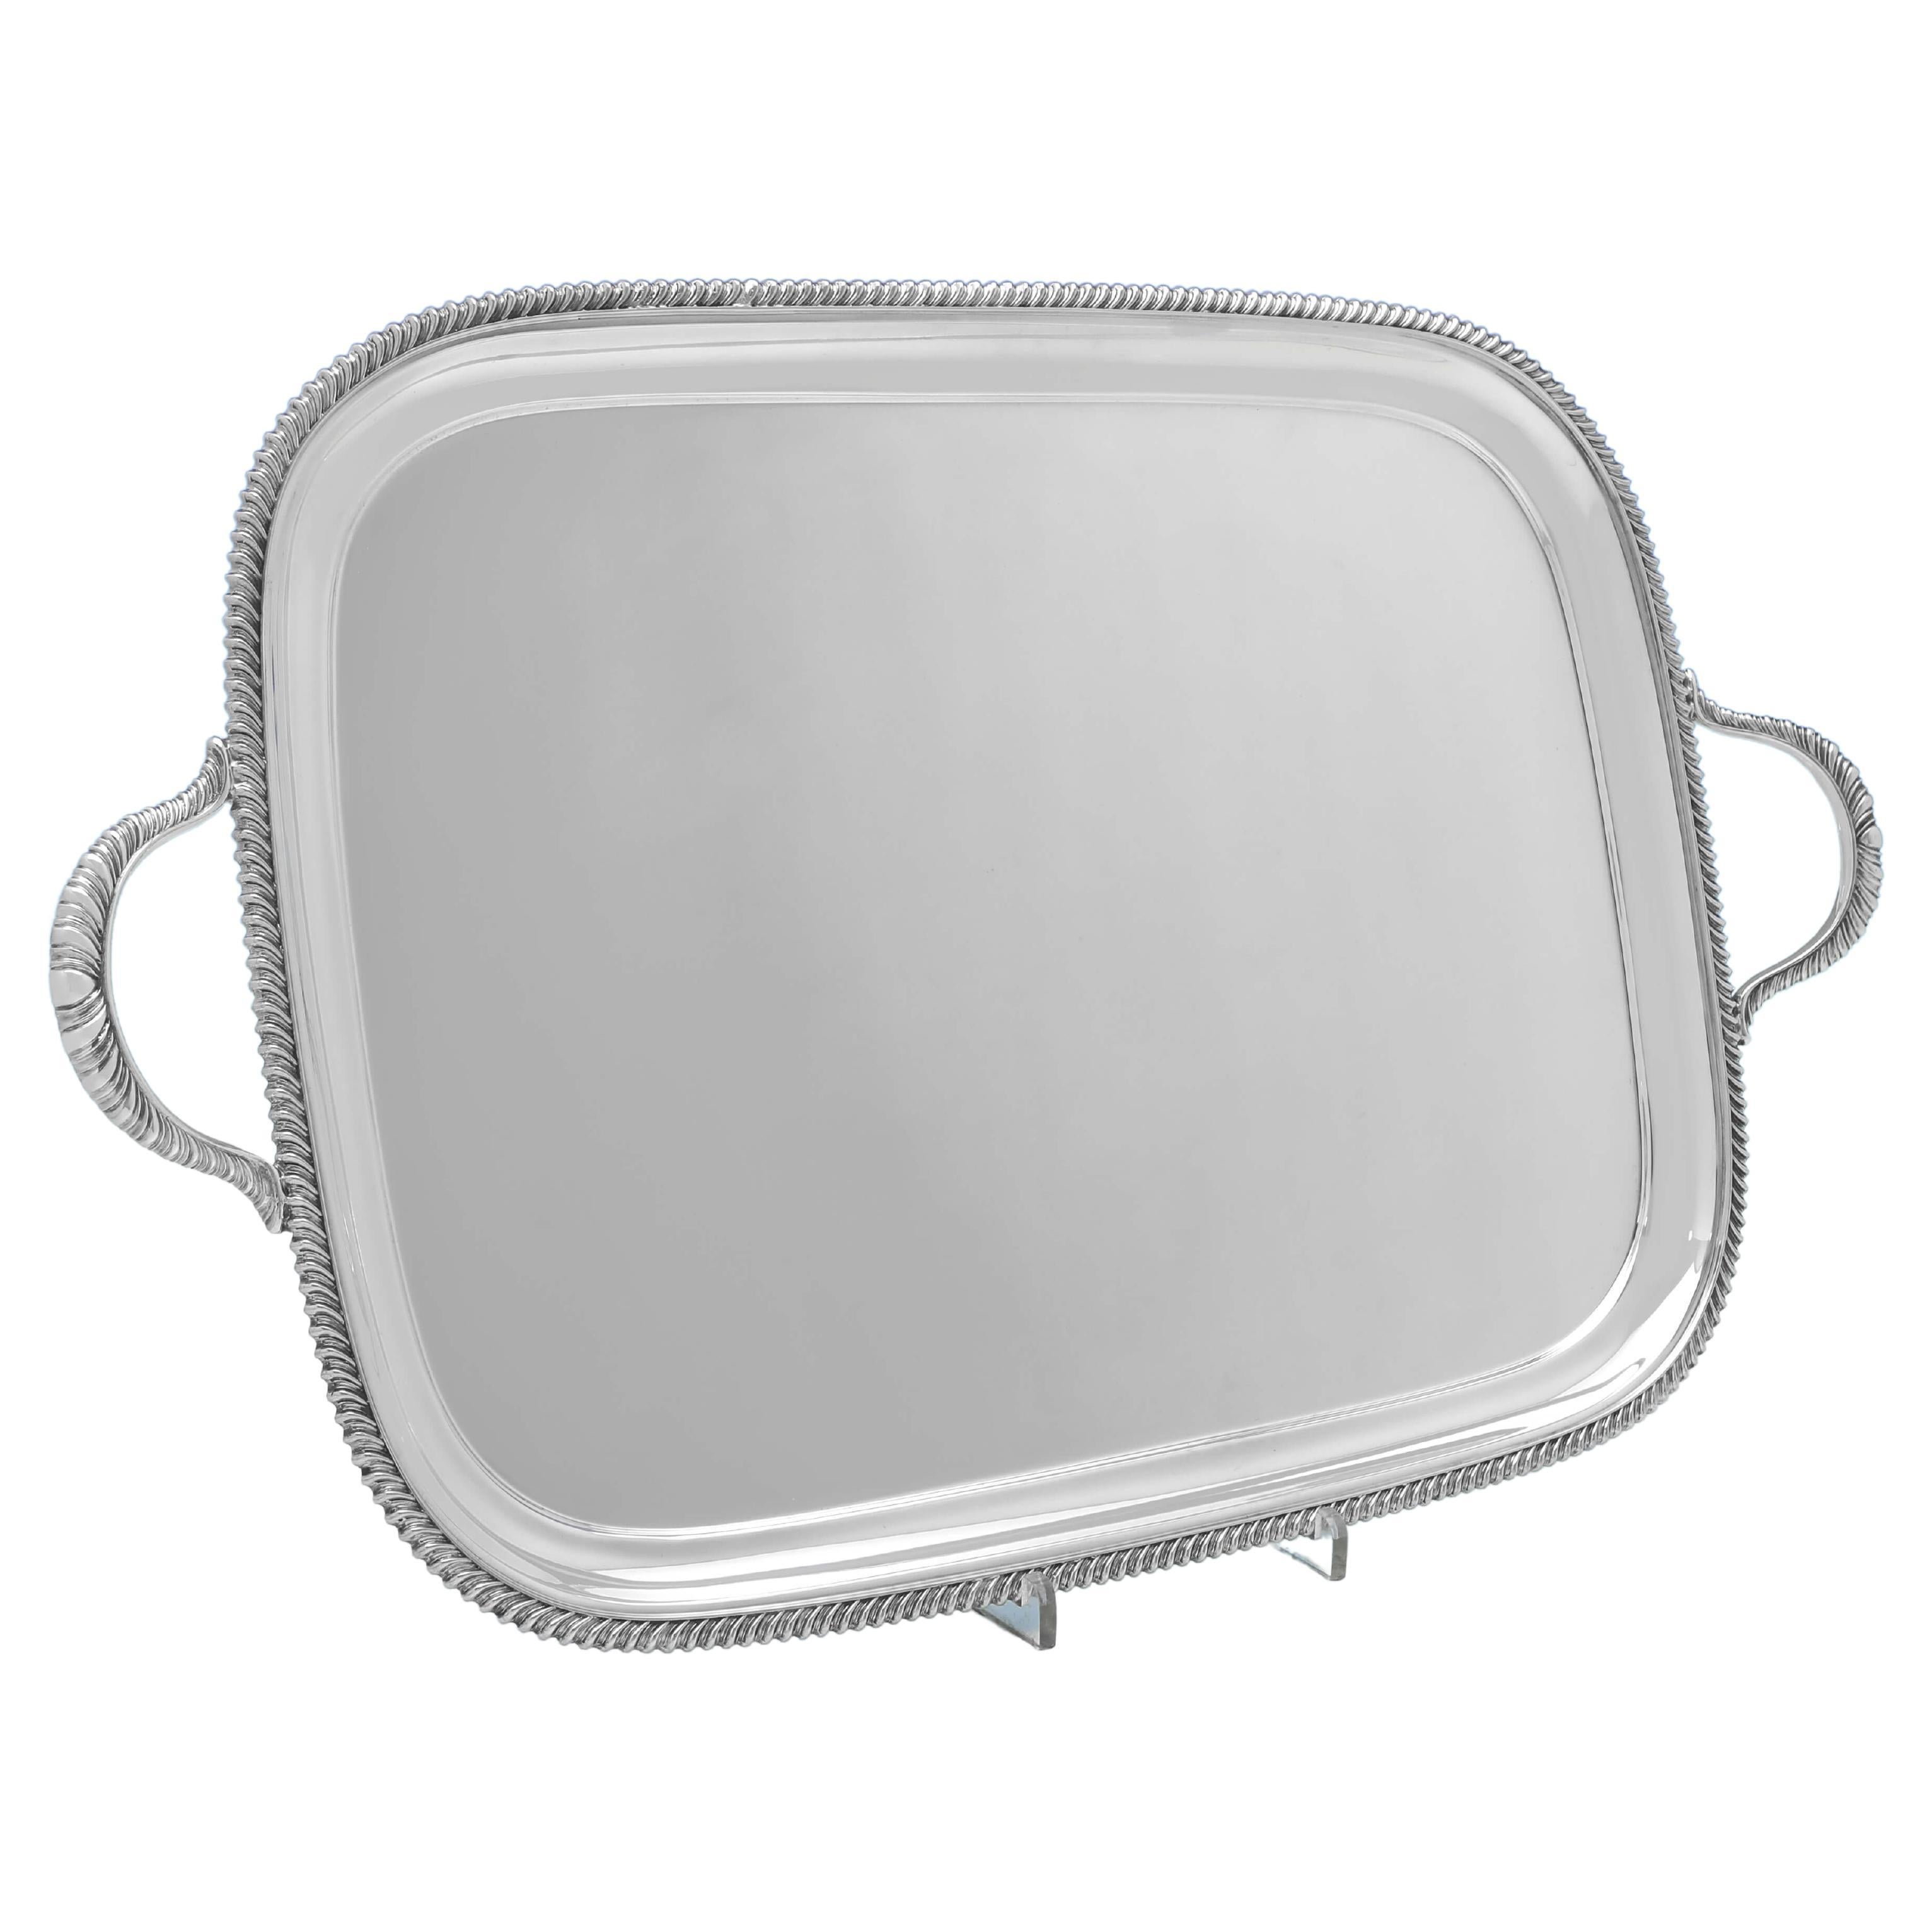 Midcentury Sterling Silver Tray Hallmarked 1952 by Atkin Brothers For Sale